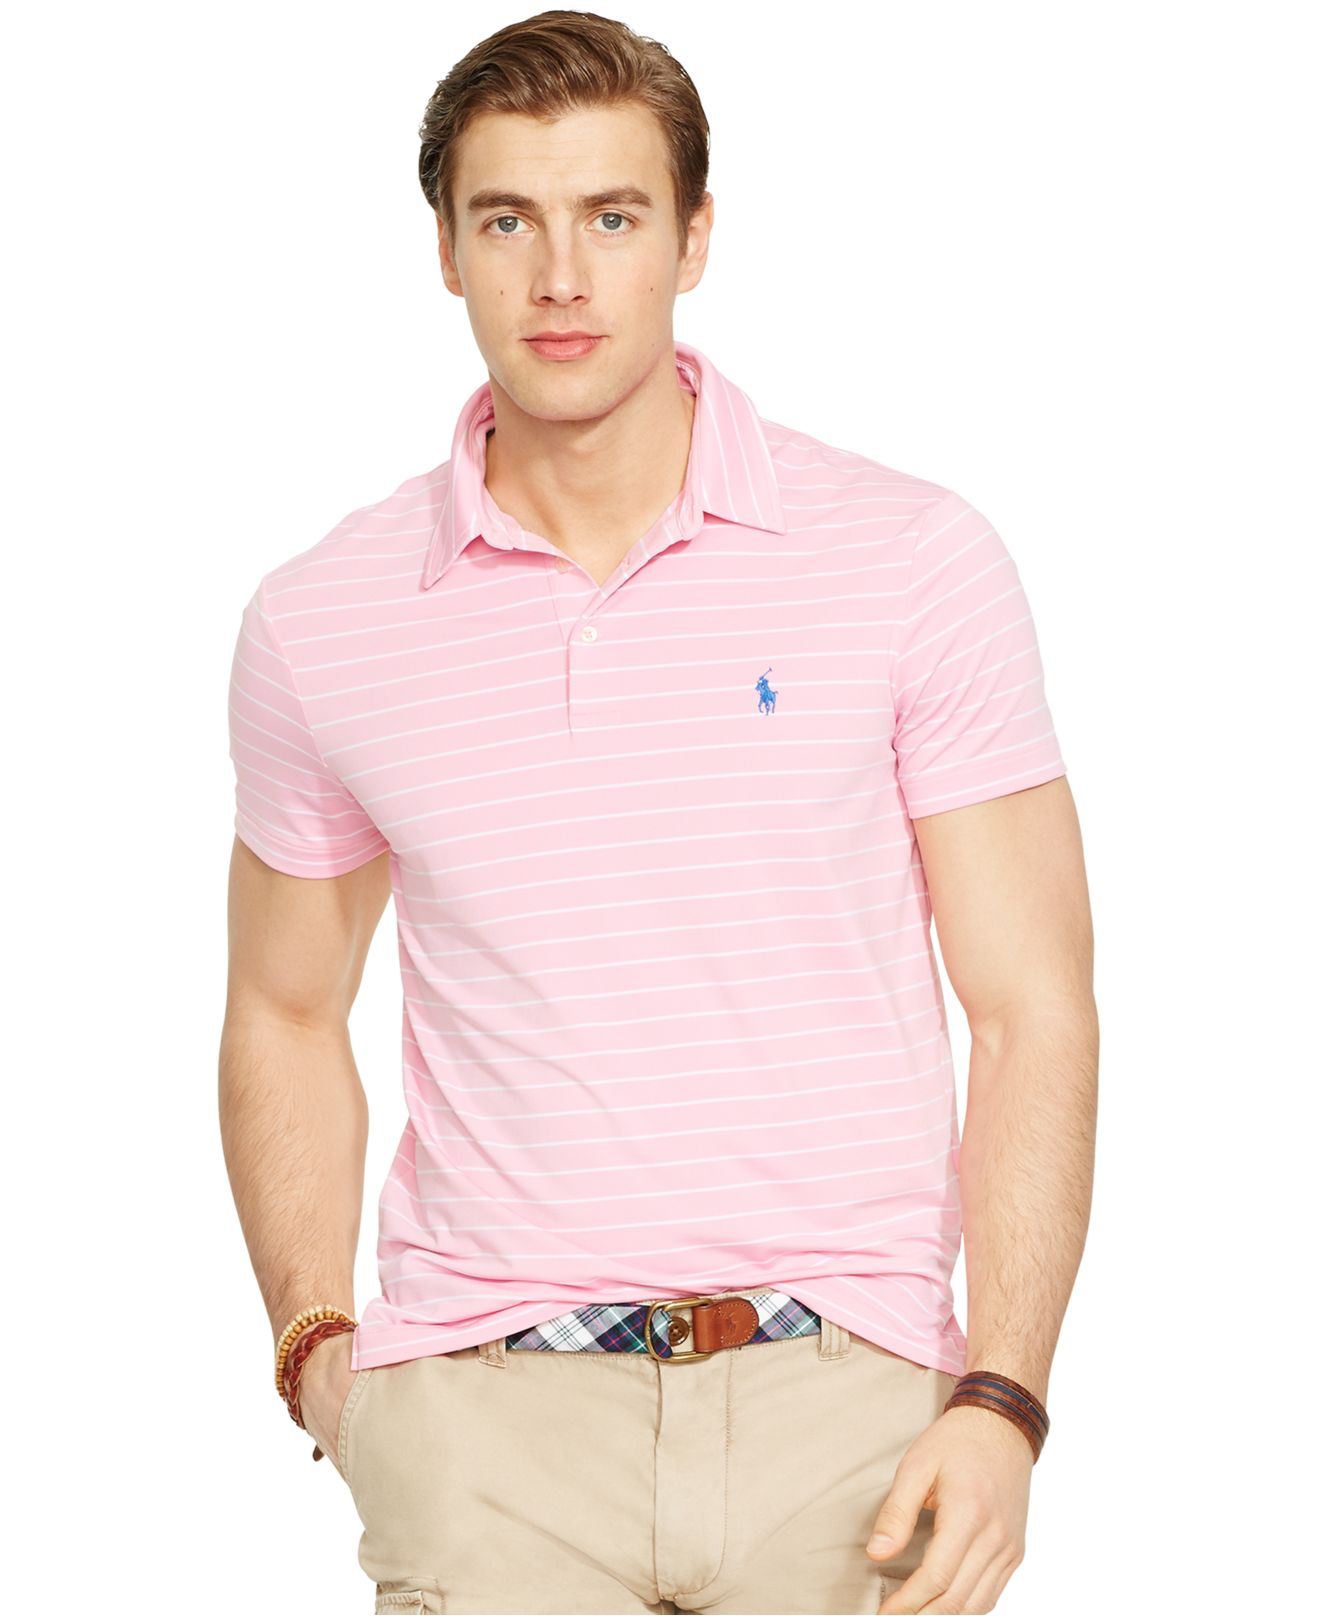 Lyst - Polo Ralph Lauren Striped Performance Polo Shirt in Pink for Men